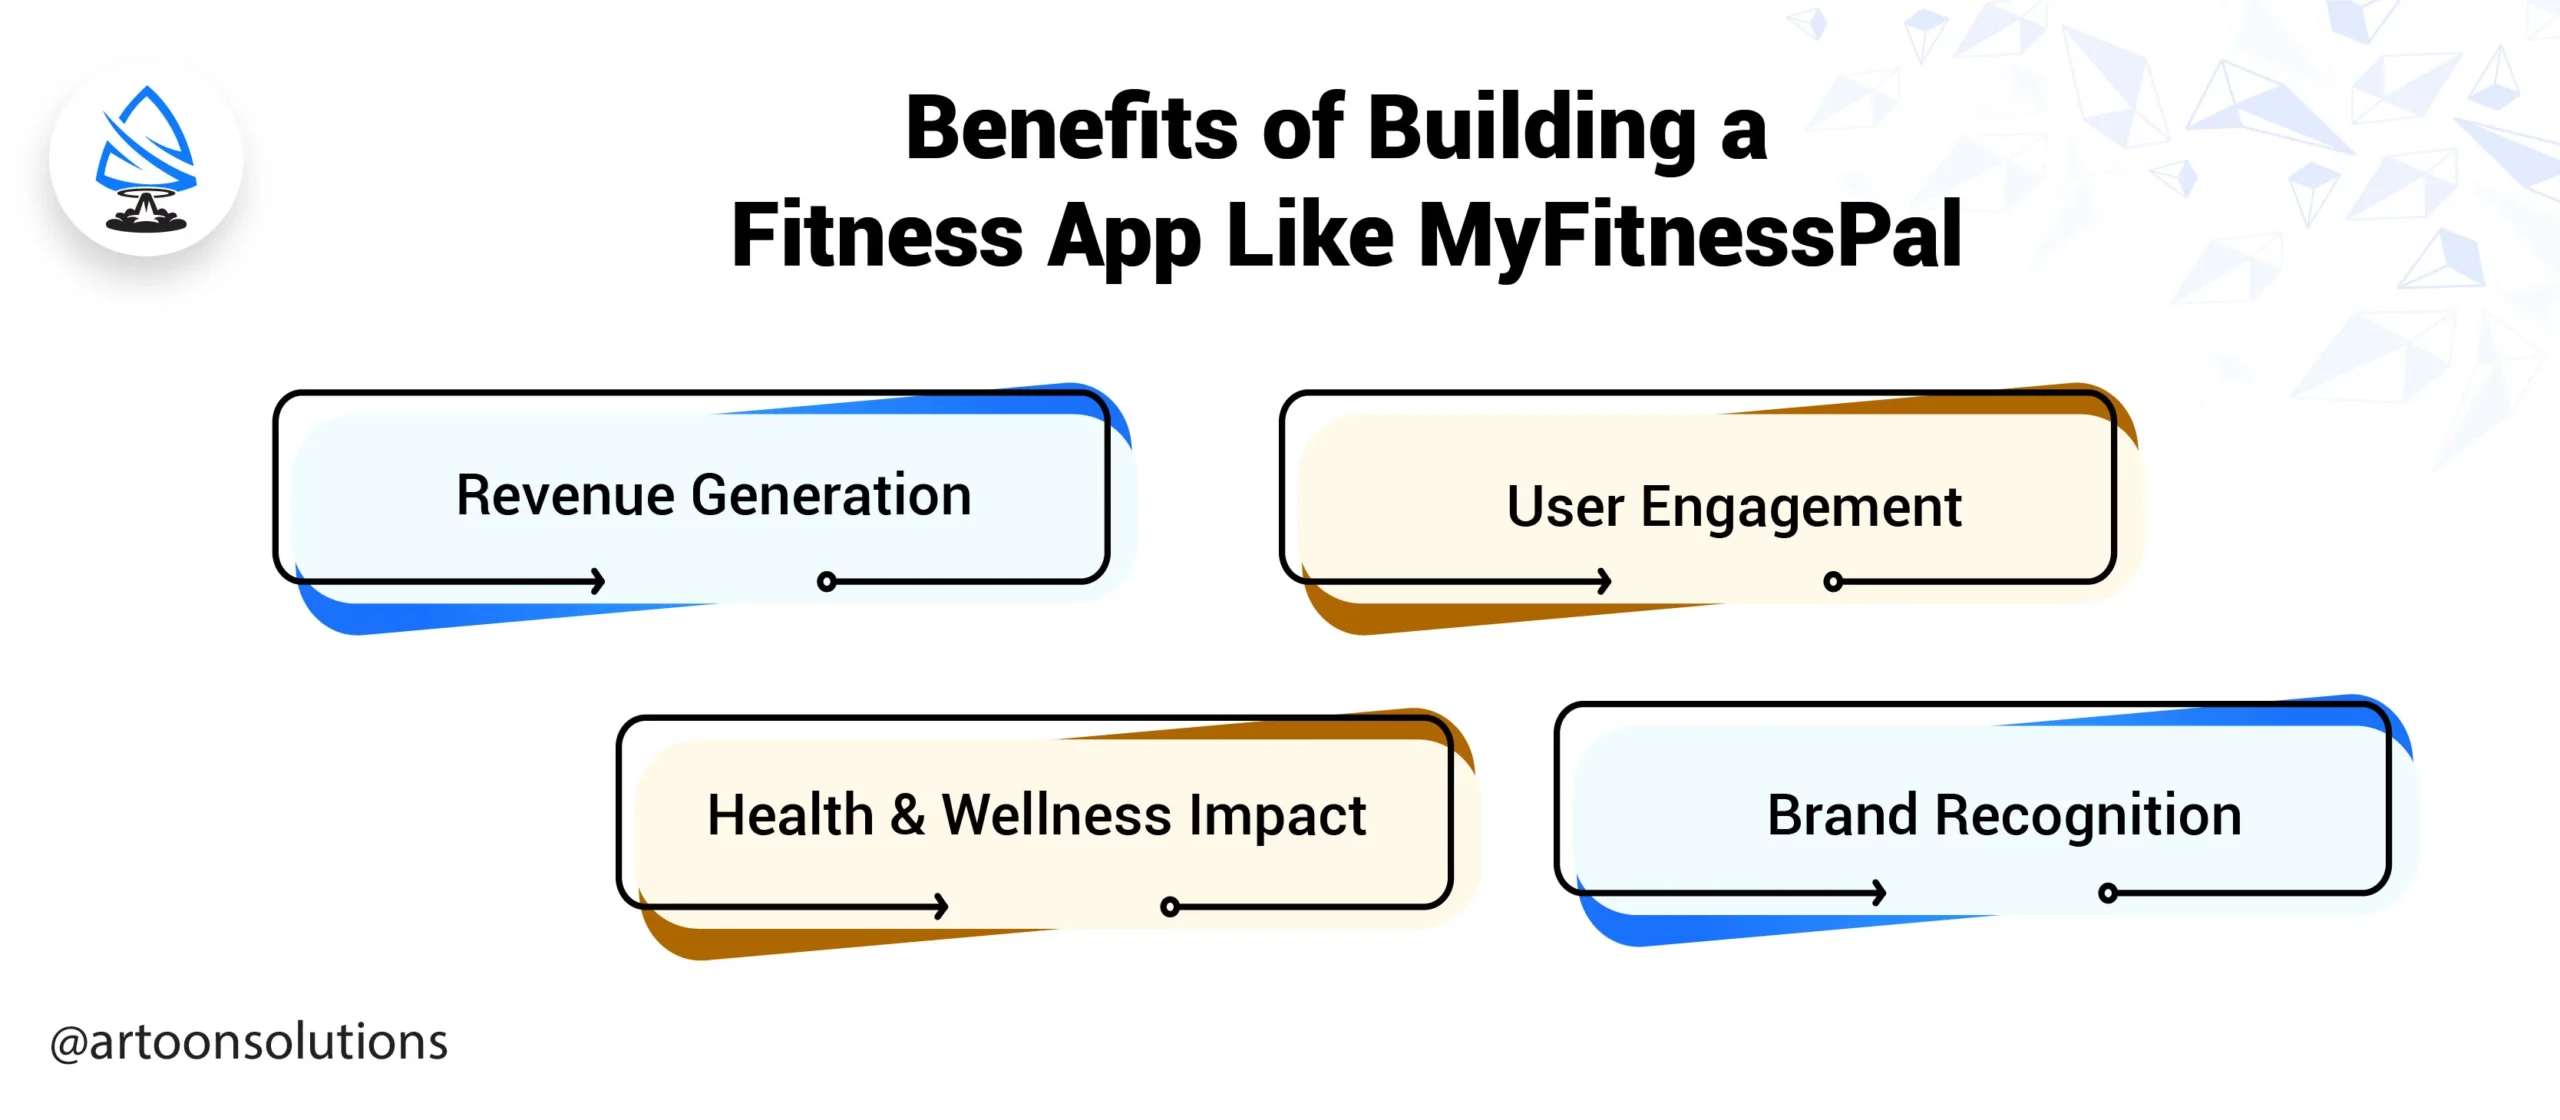 How to Build a Fitness and Nutrition App Like MyFitnessPal?